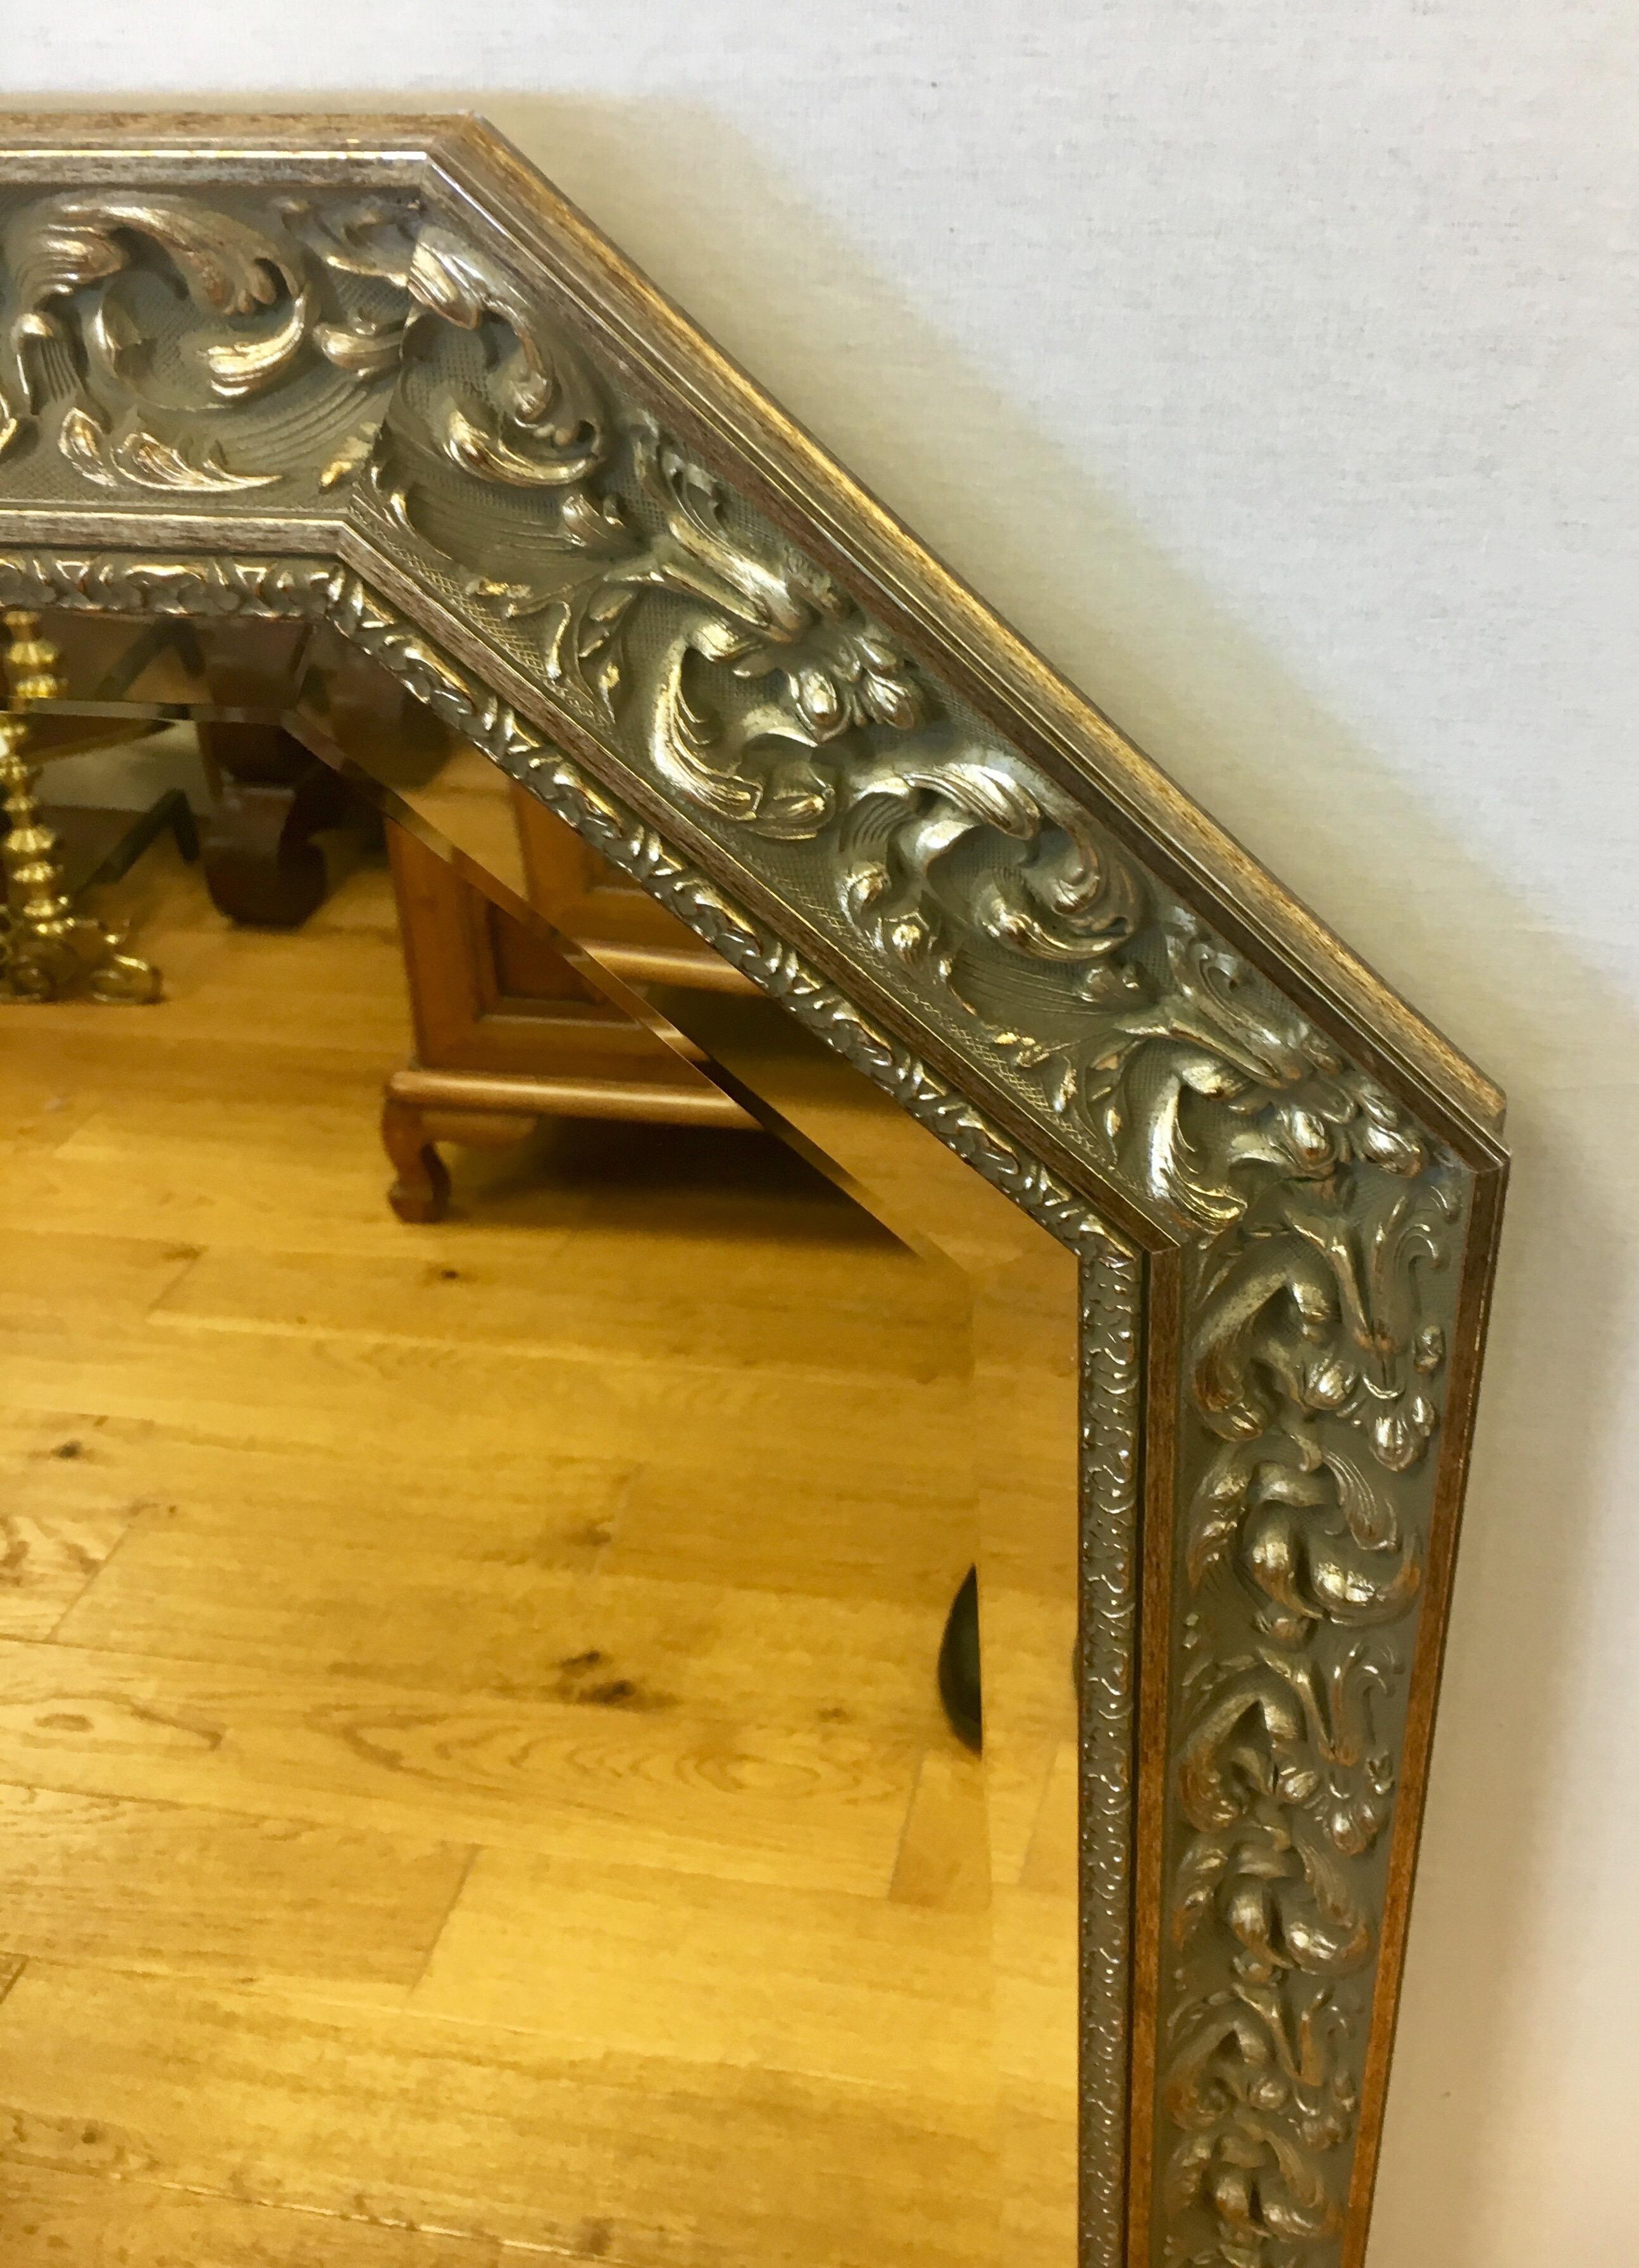 Simply but elegant octagonal wall mirror that has a blend of gilt and silver finish.
The mirror is beveled and condition throughout is excellent.